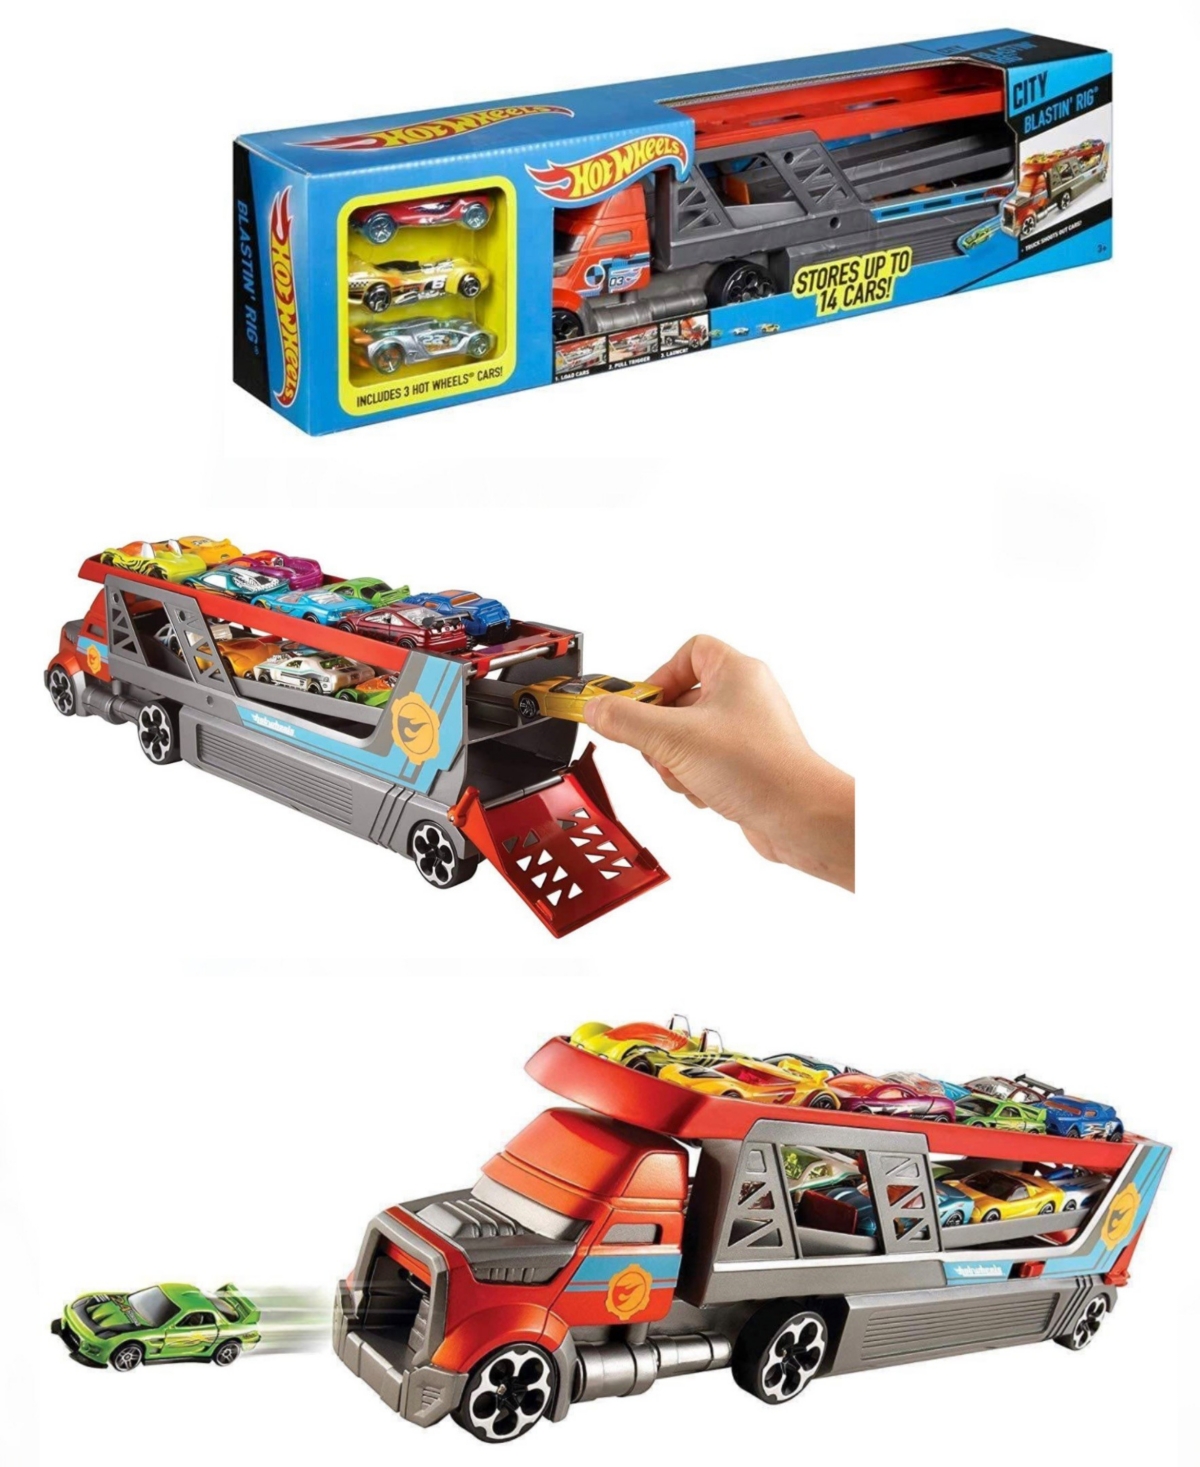 Mattel Hot Wheels Car Blasting Big Rig Play Toy Truck Set, 4 Pieces In Multi Colored Plastic